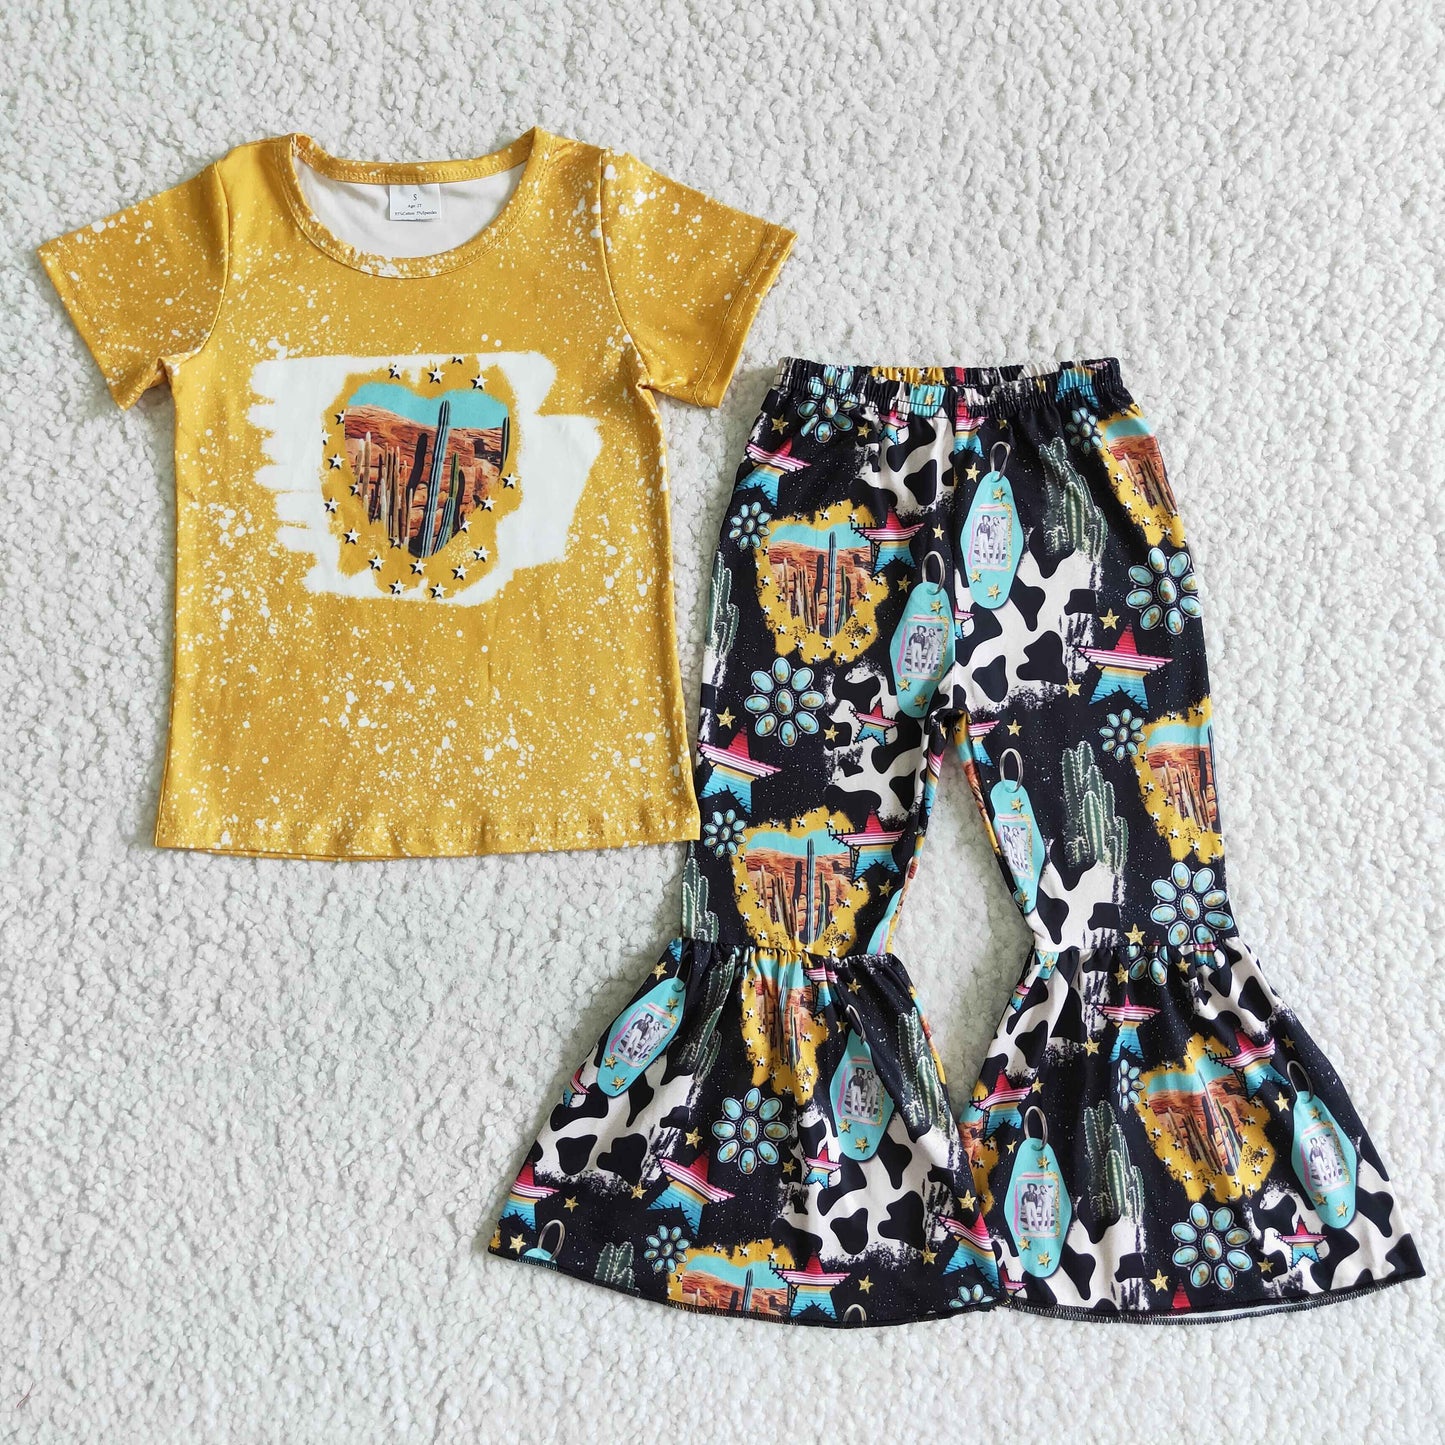 western girl's cactus pants set outfit